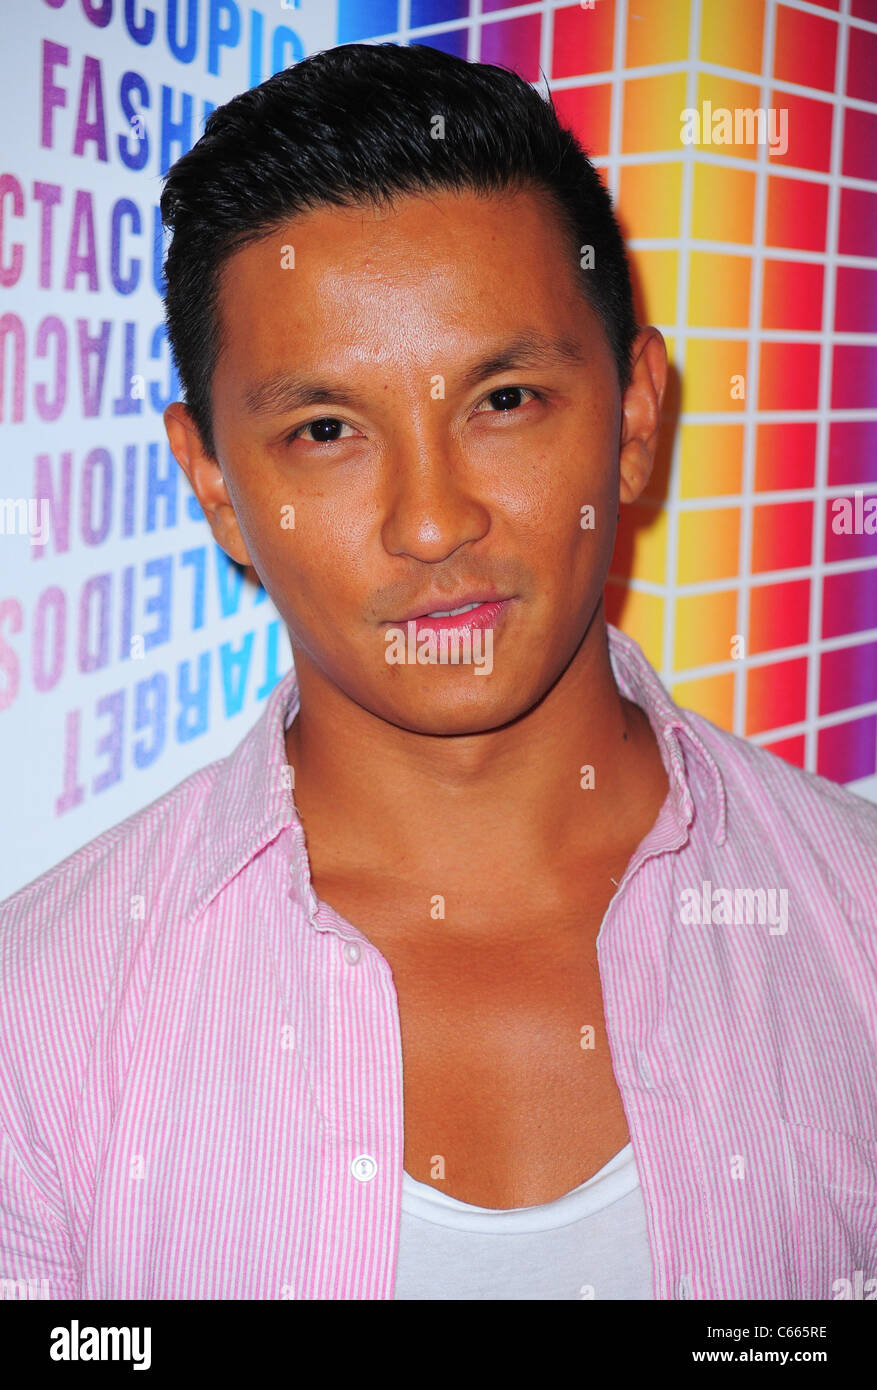 Prabal Gurung in attendance for Target Kaleidoscopic Fashion Spectacular Party, Biergarten at The Standard Hotel, New York, NY August 18, 2010. Photo By: Gregorio T. Binuya/Everett Collection Stock Photo